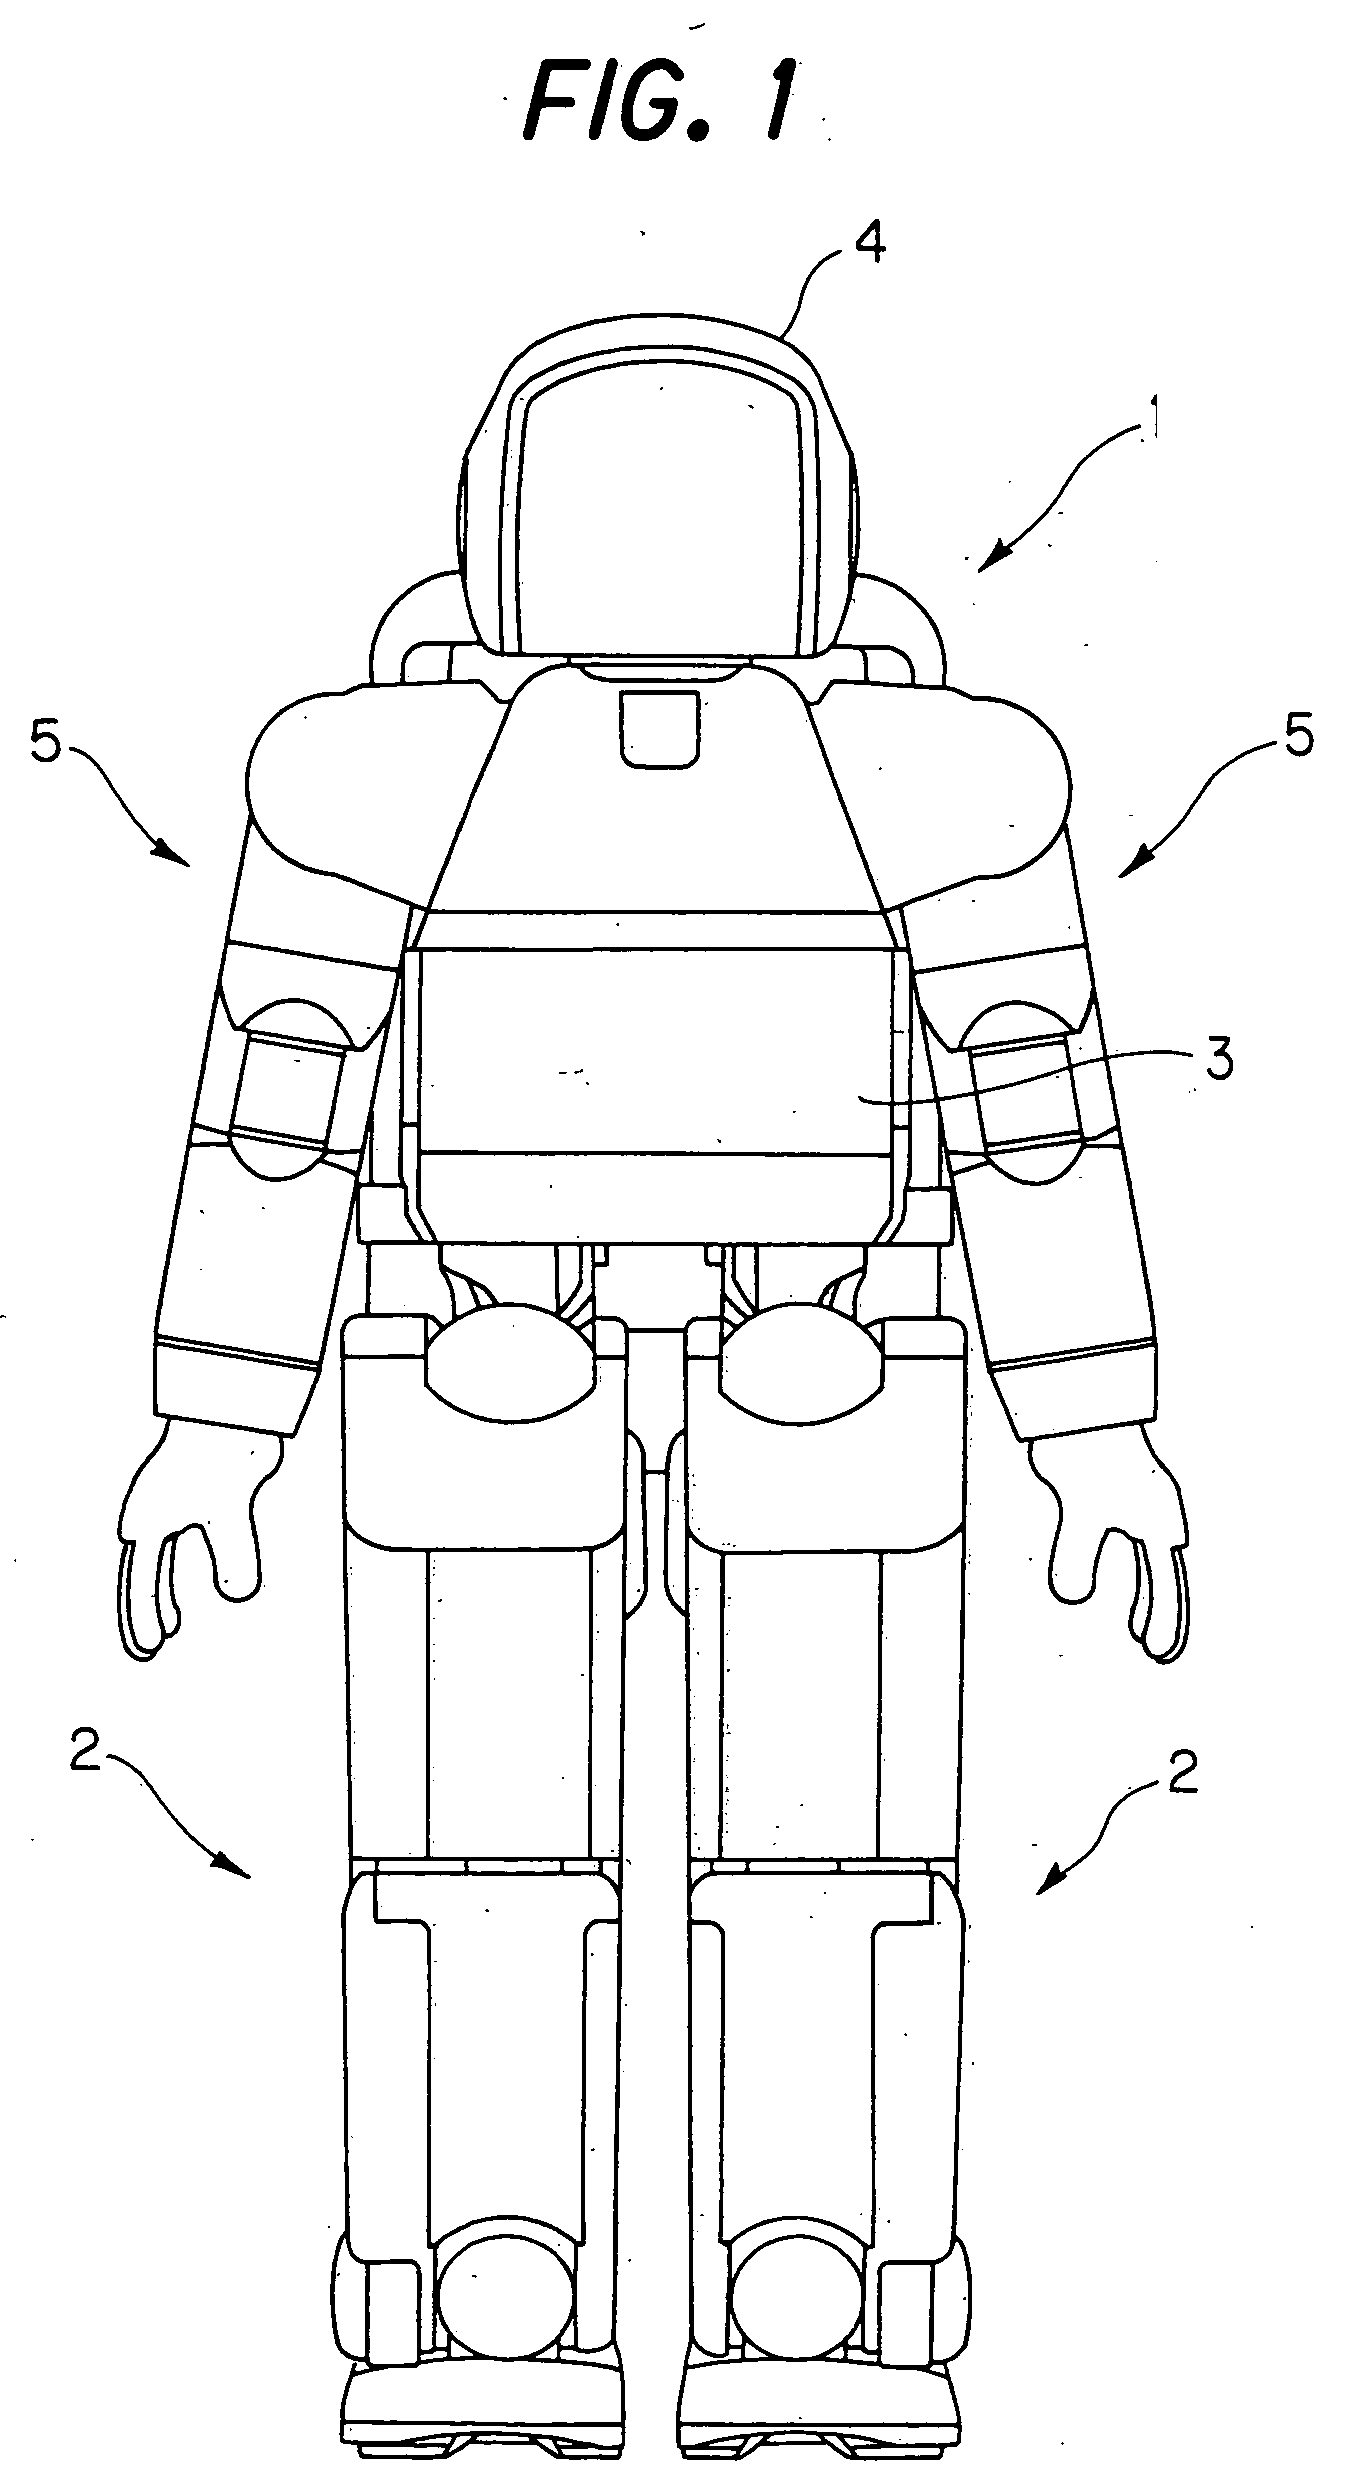 Joint structure of robot